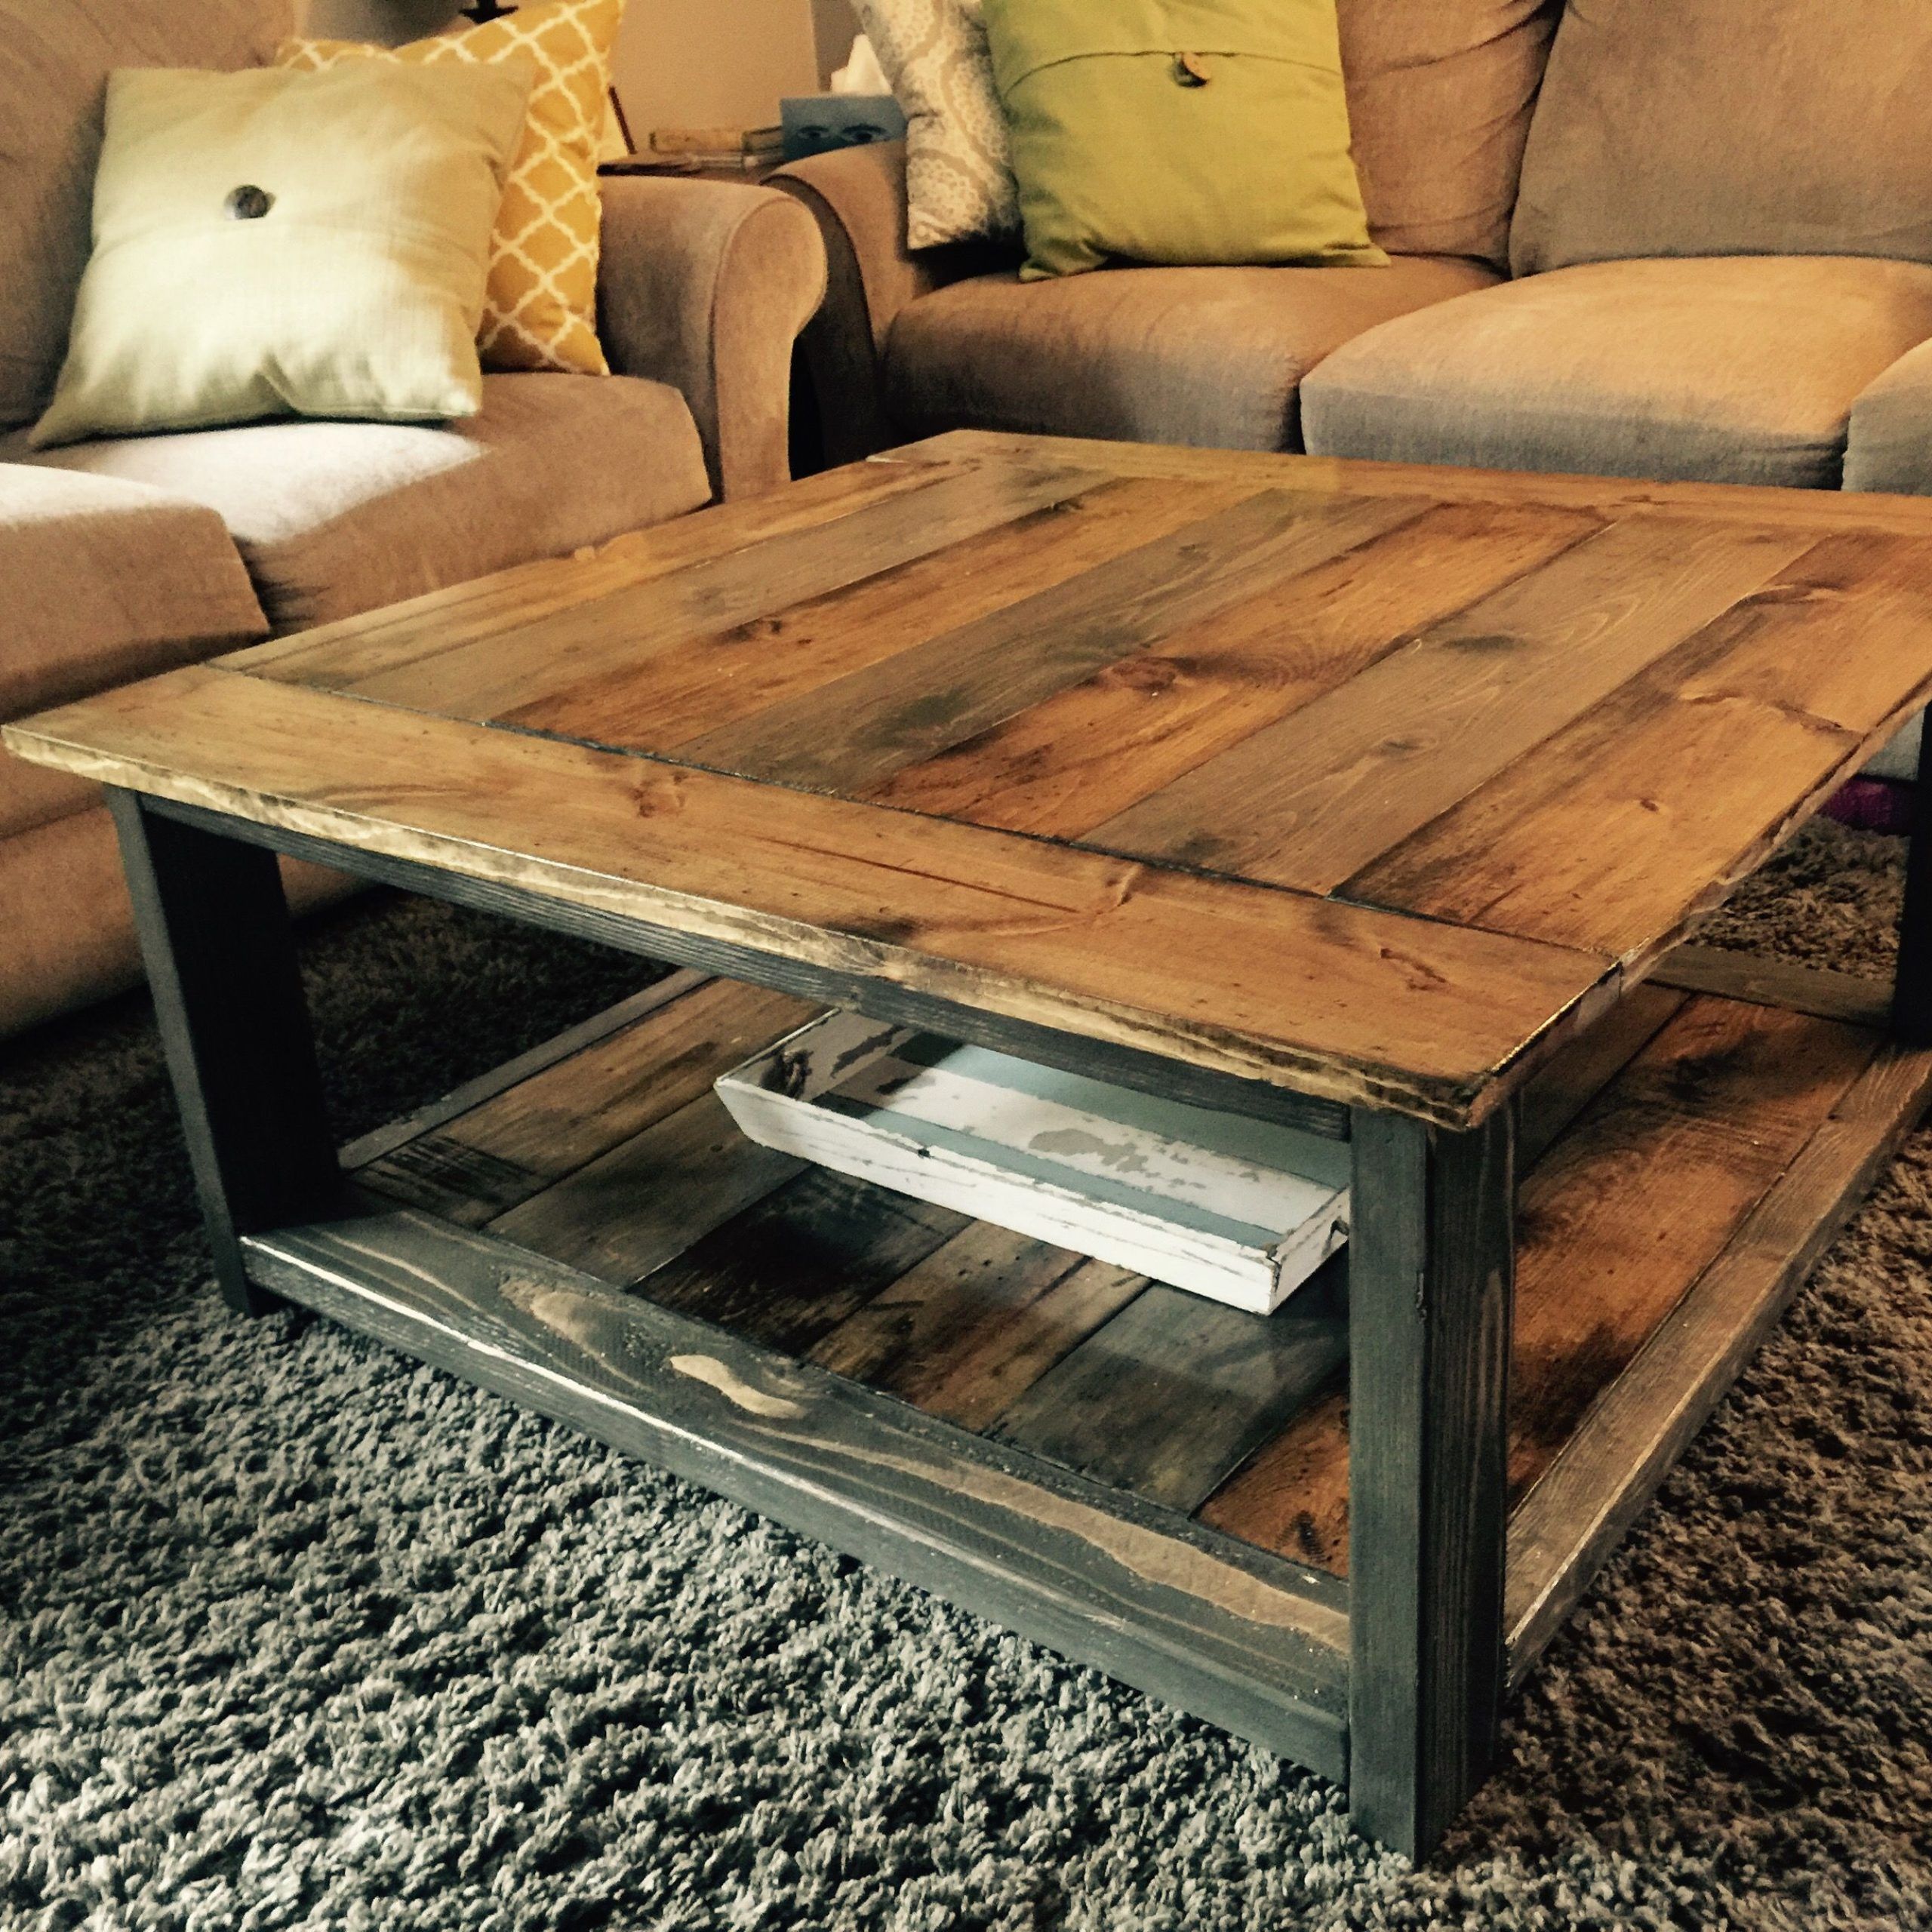 Rustic Xless Coffee Table | Do It Yourself Home Projects From Ana White Within Rustic Wood Coffee Tables (Gallery 9 of 21)